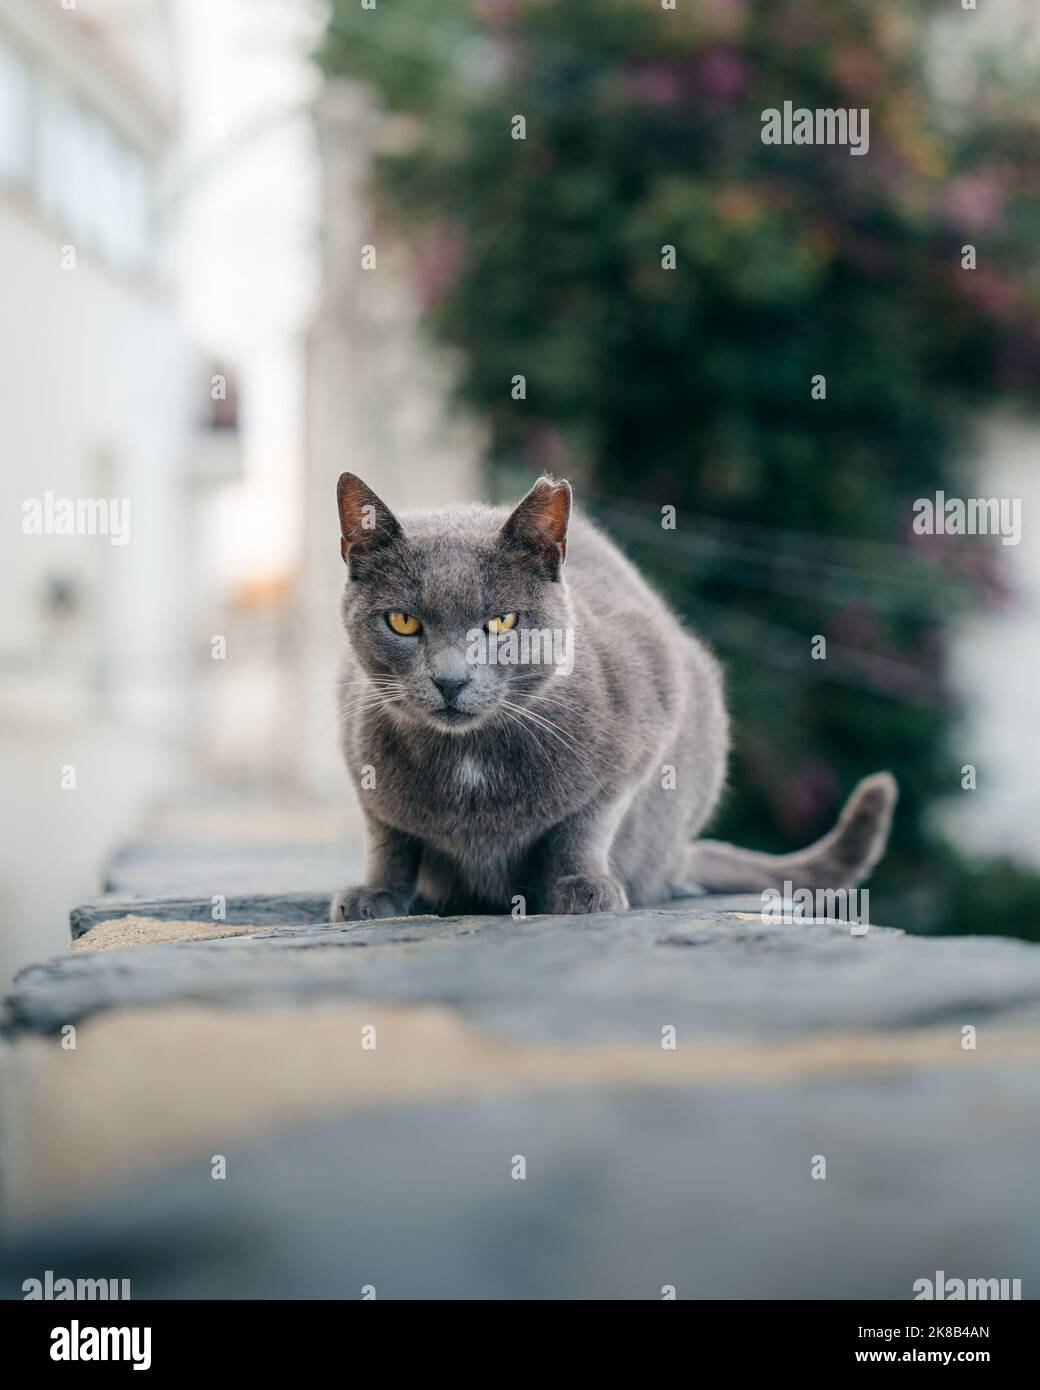 A street cat without trust posing for photography Stock Photo